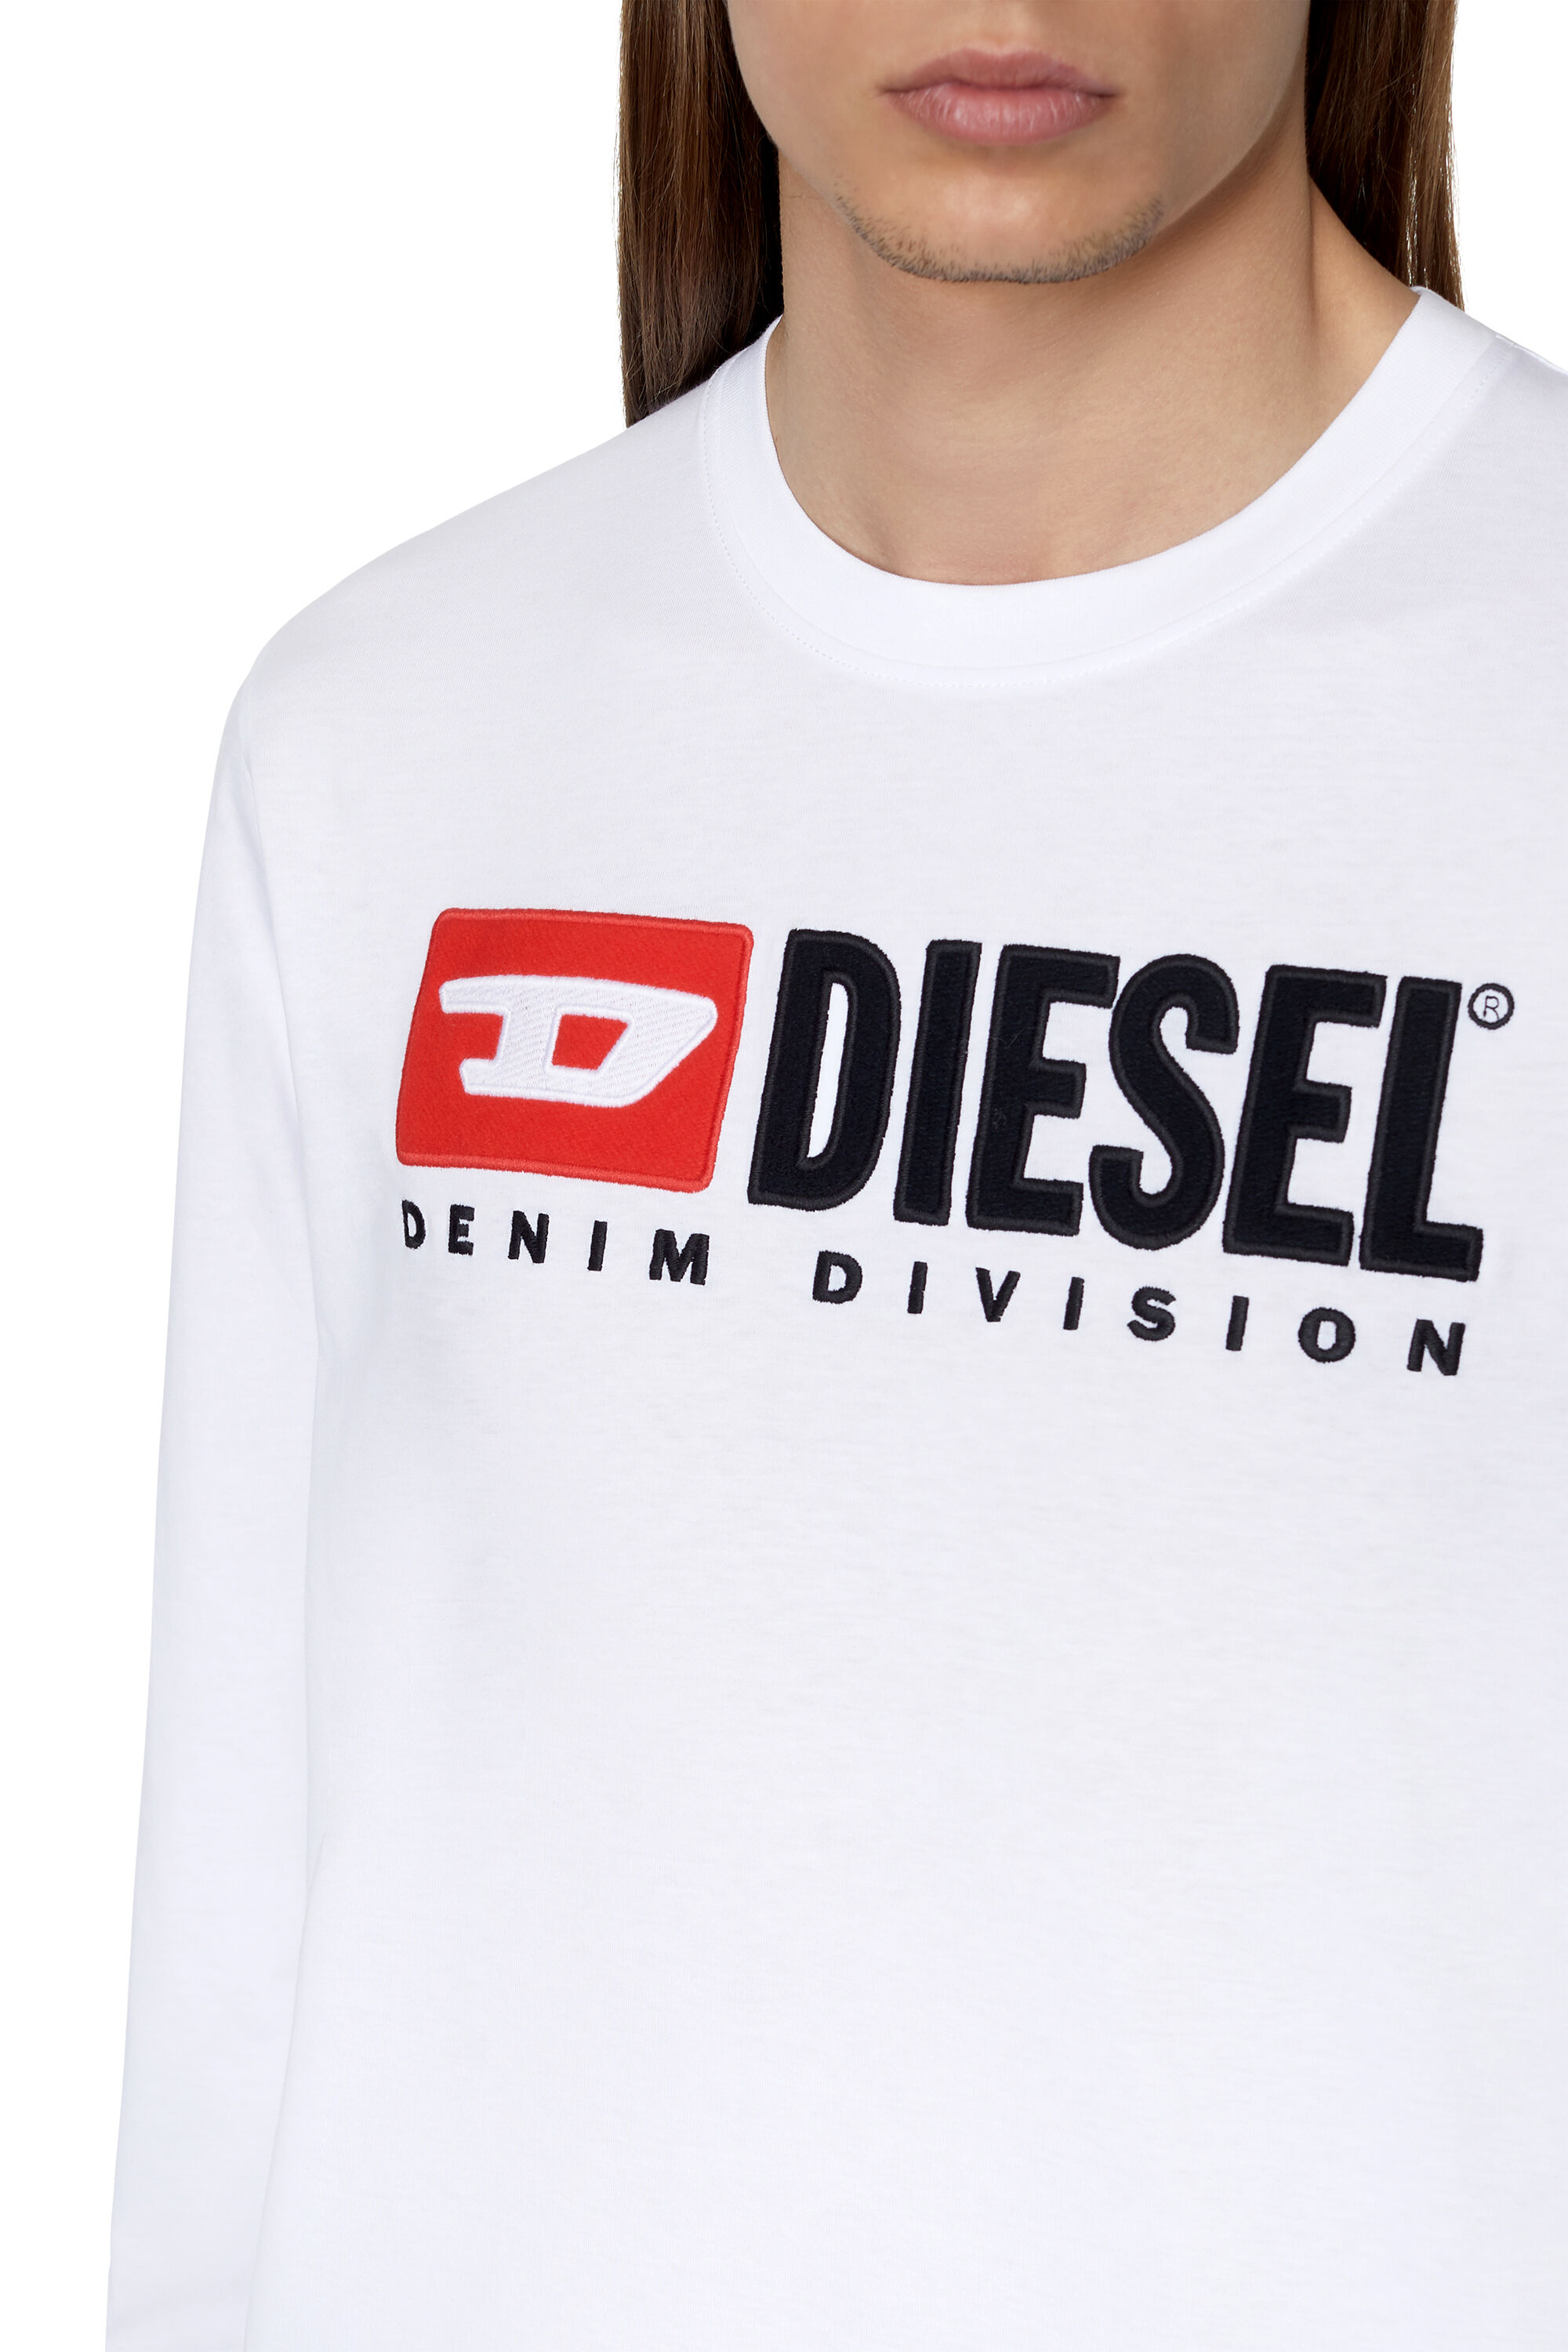 T-JUST-LS-DIV Man: Long-sleeve T-shirt with embroidery | Diesel